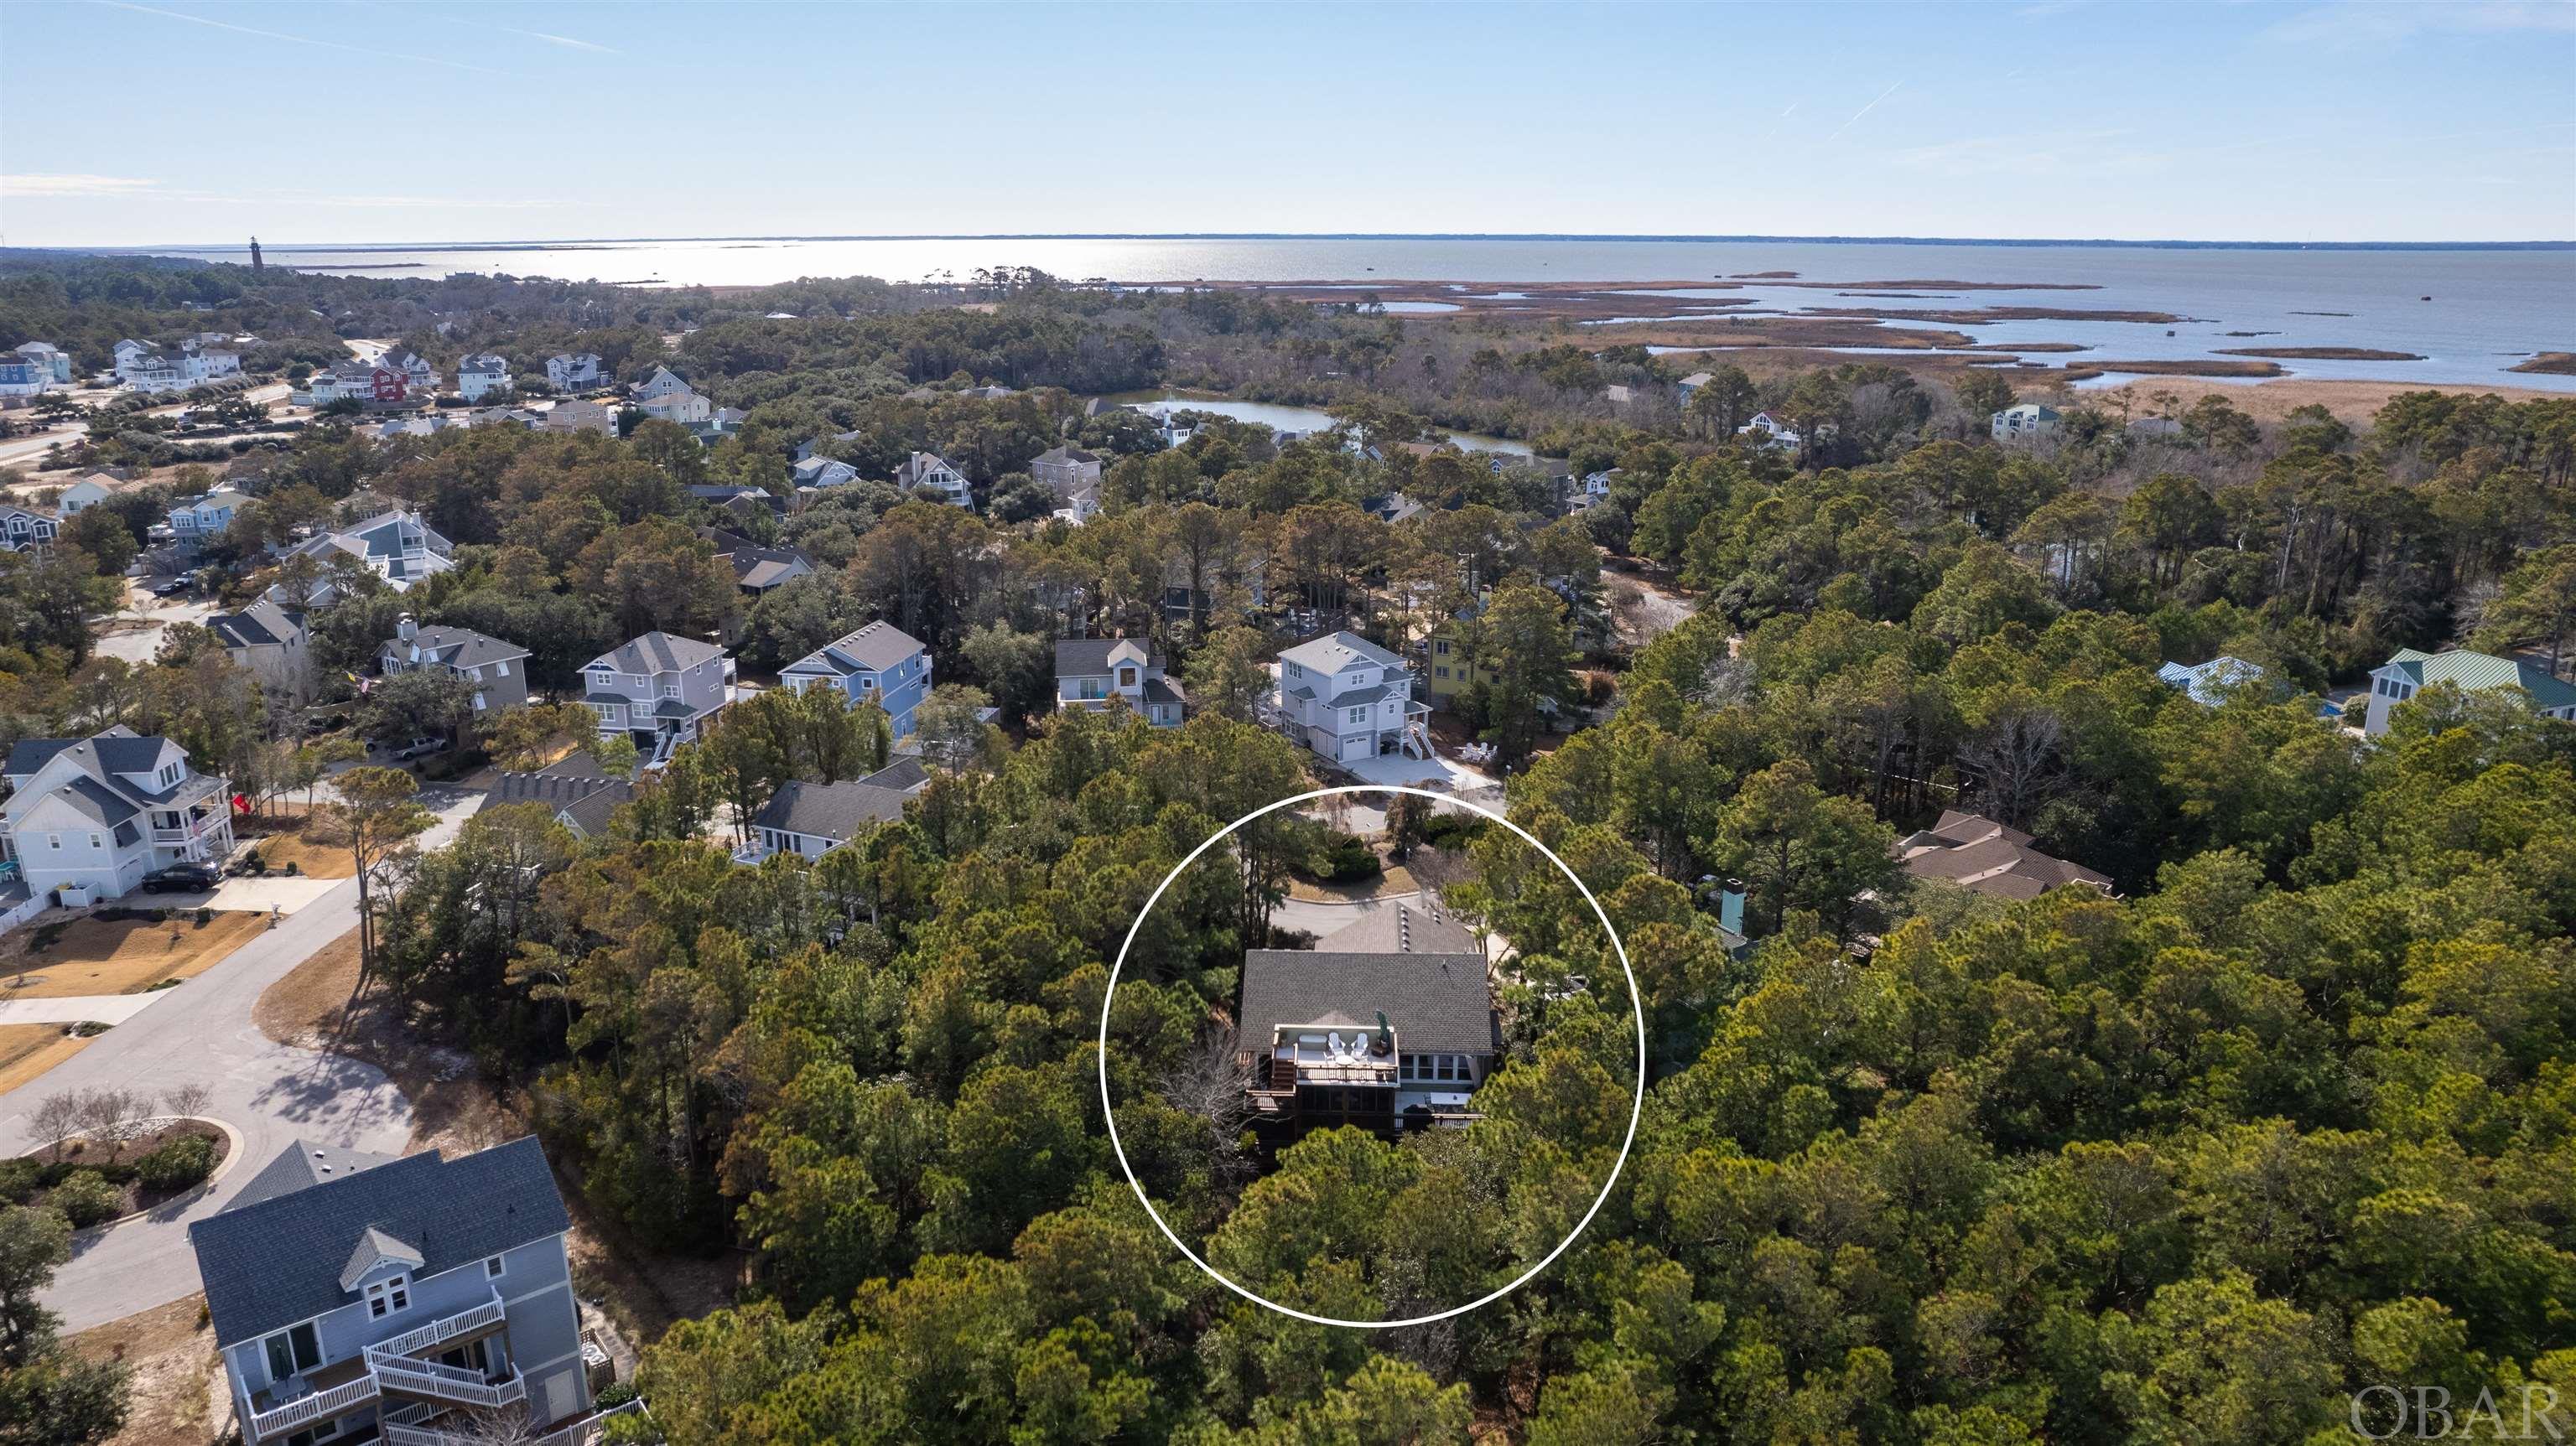 1277 North Lake Court, Corolla, NC 27927, 3 Bedrooms Bedrooms, ,4 BathroomsBathrooms,Residential,For sale,North Lake Court,124422